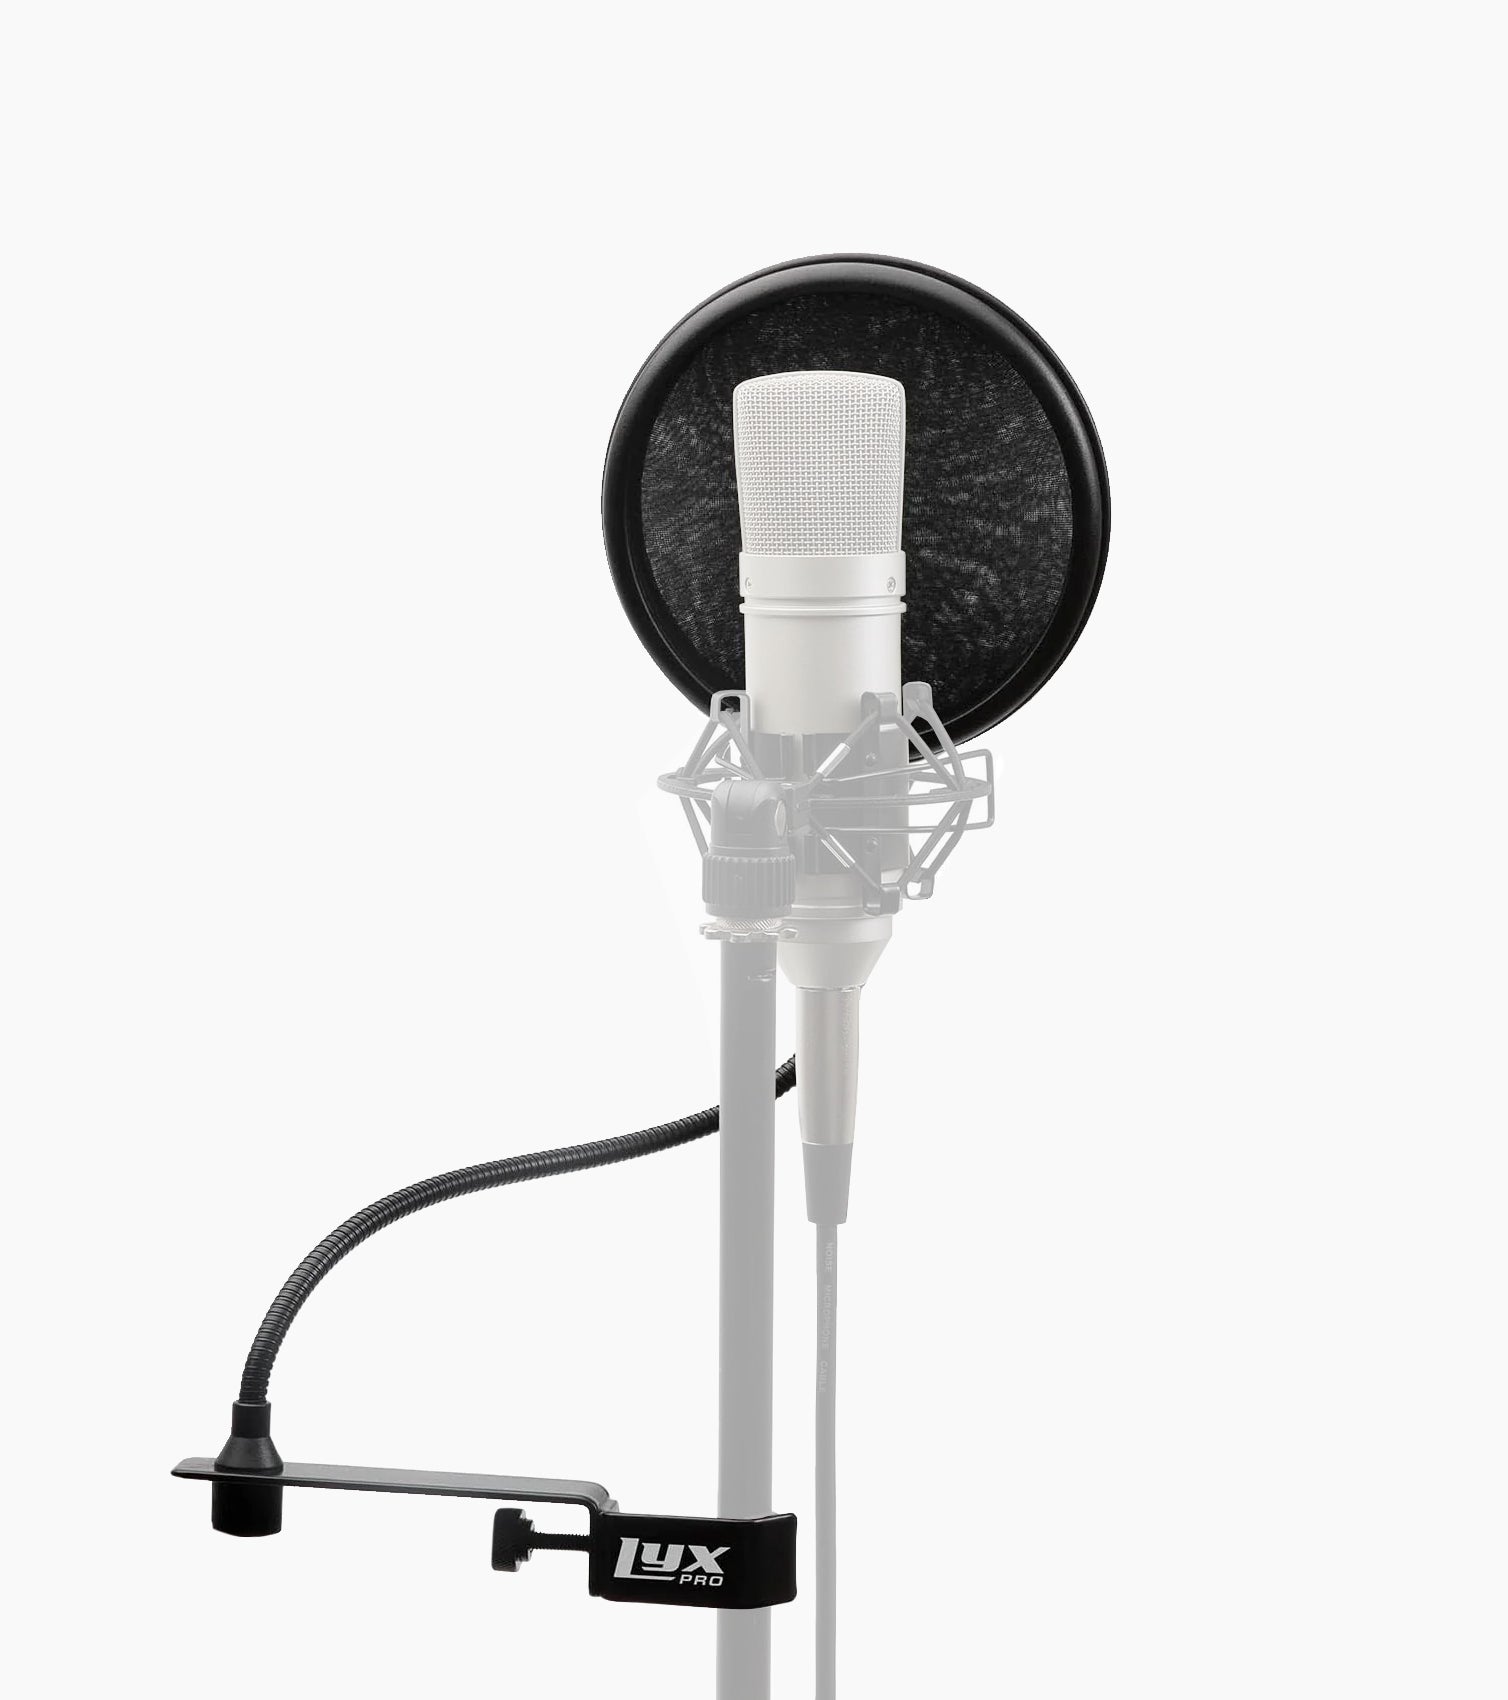  microphone pop filter with flexible gooseneck mounted on mic stand